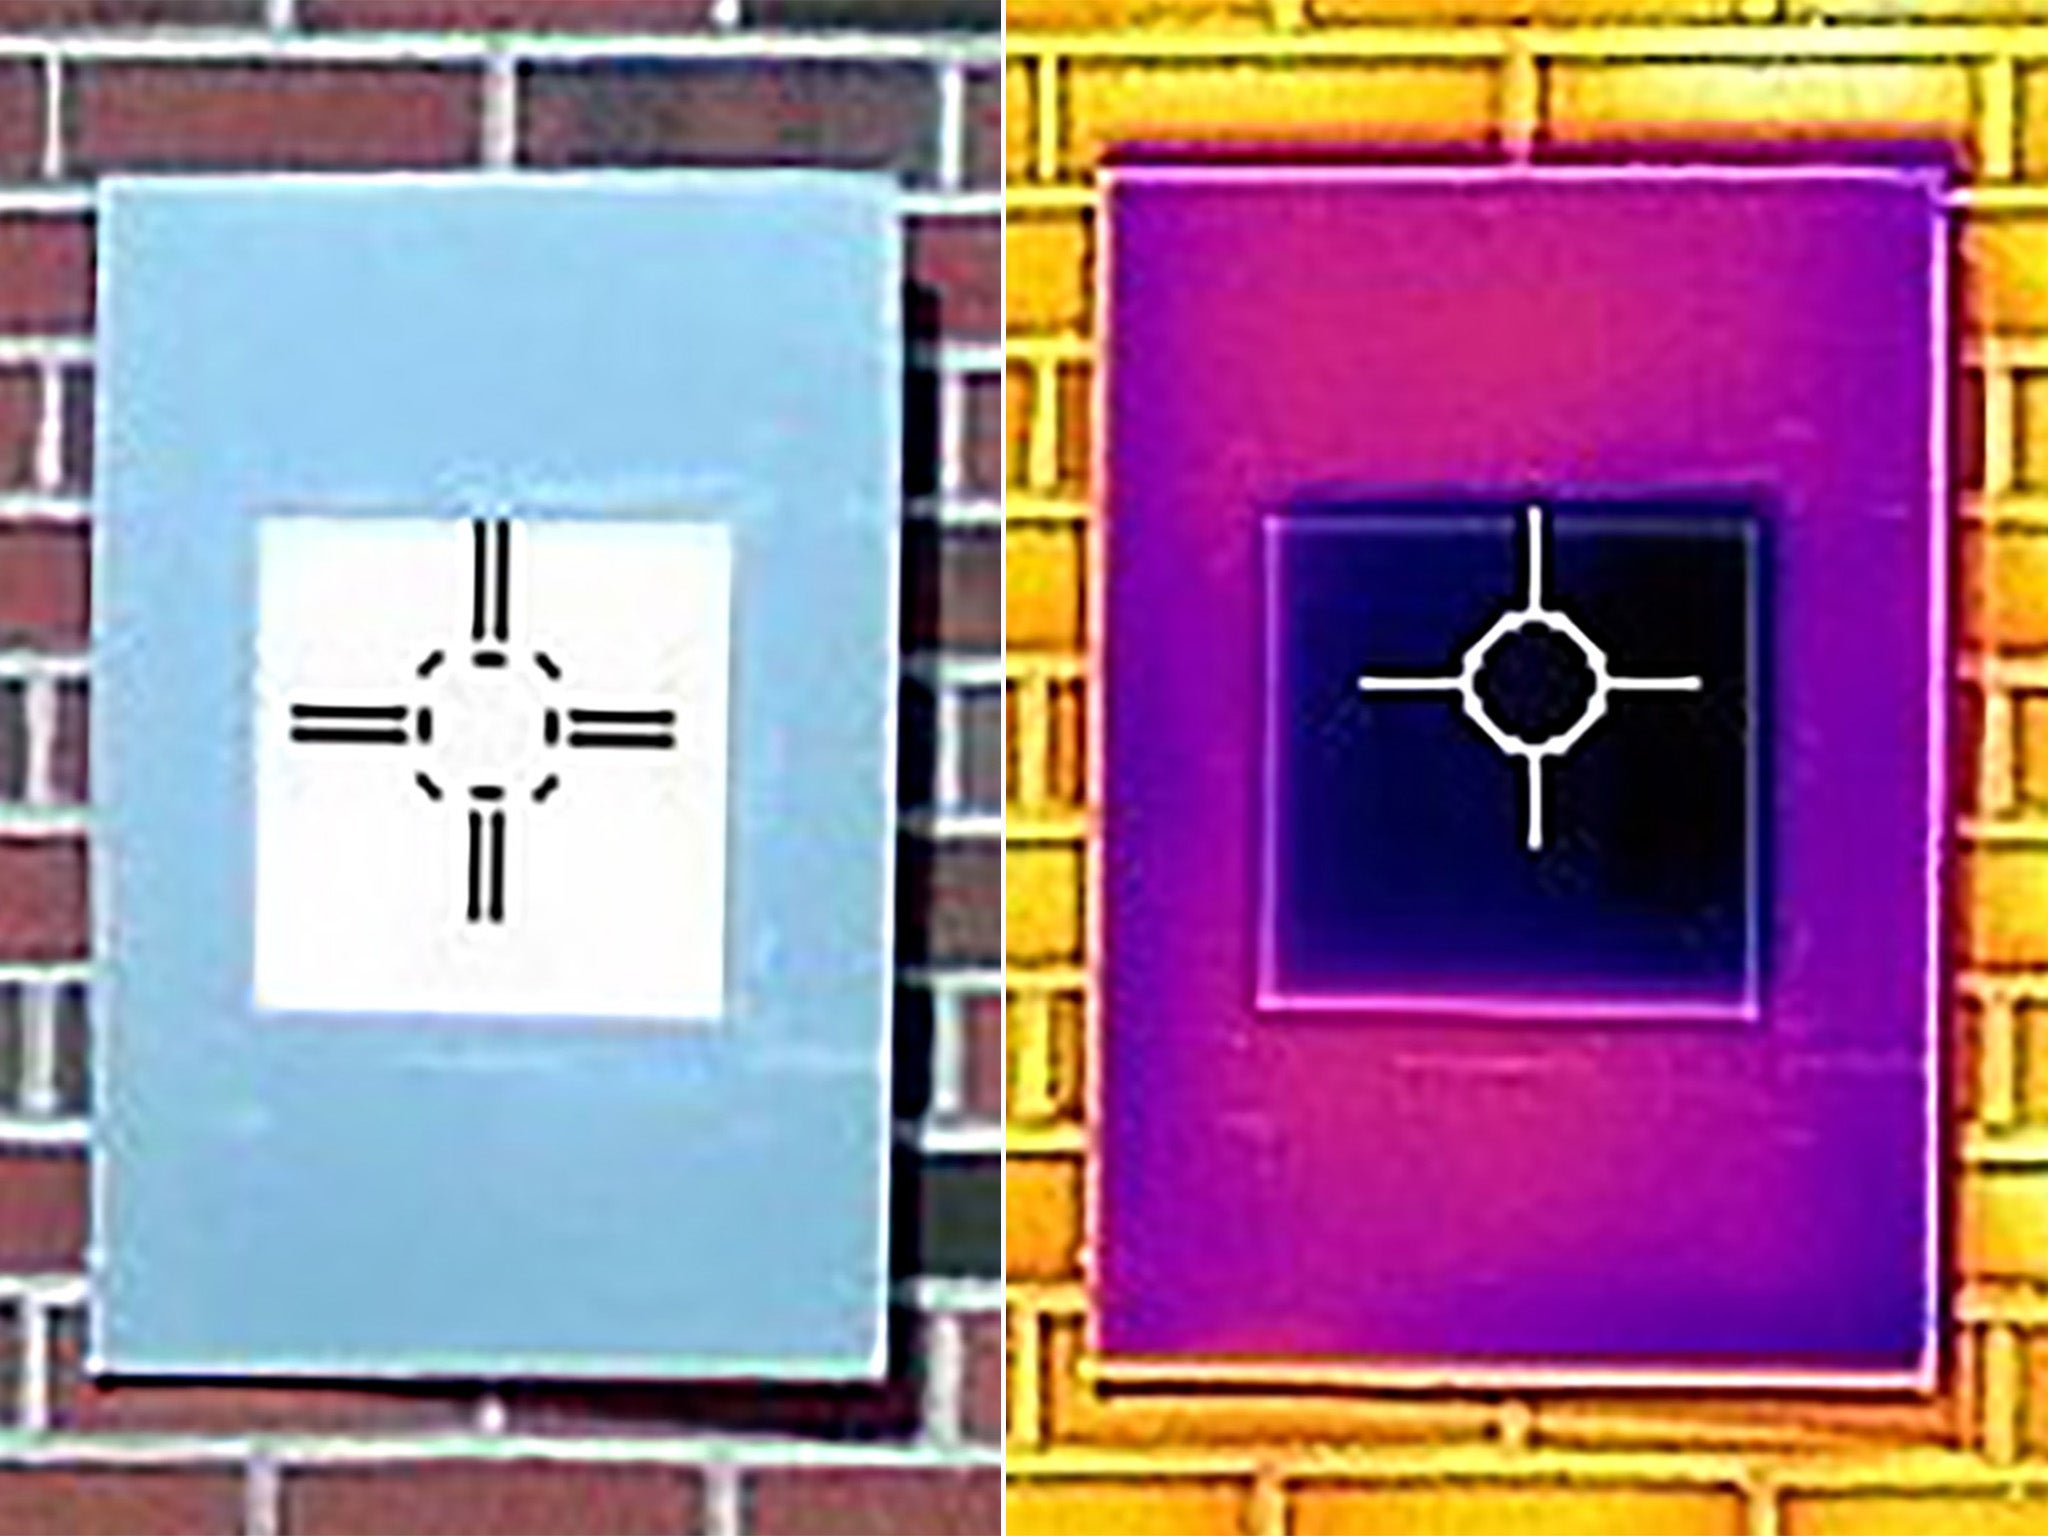 An infrared image (R) shows how the paint cools a surface below ambient temperature